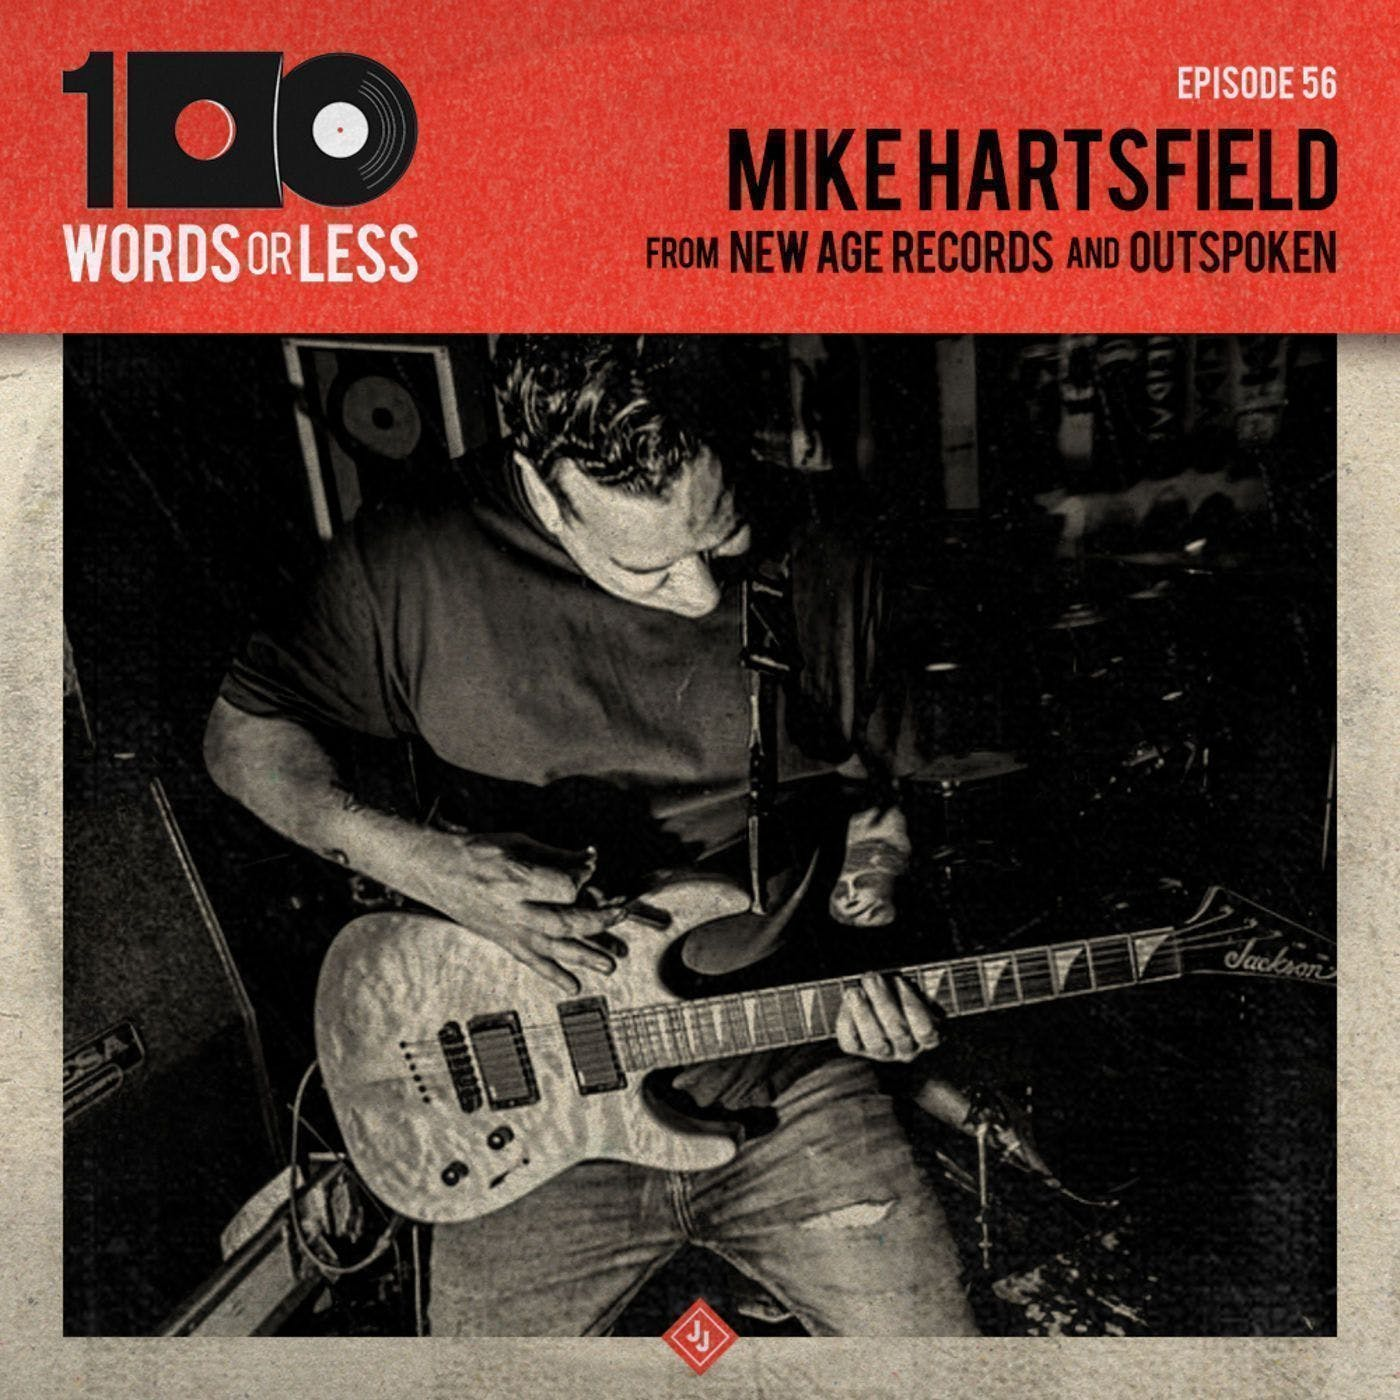 Mike Hartsfield from New Age Records/Outspoken